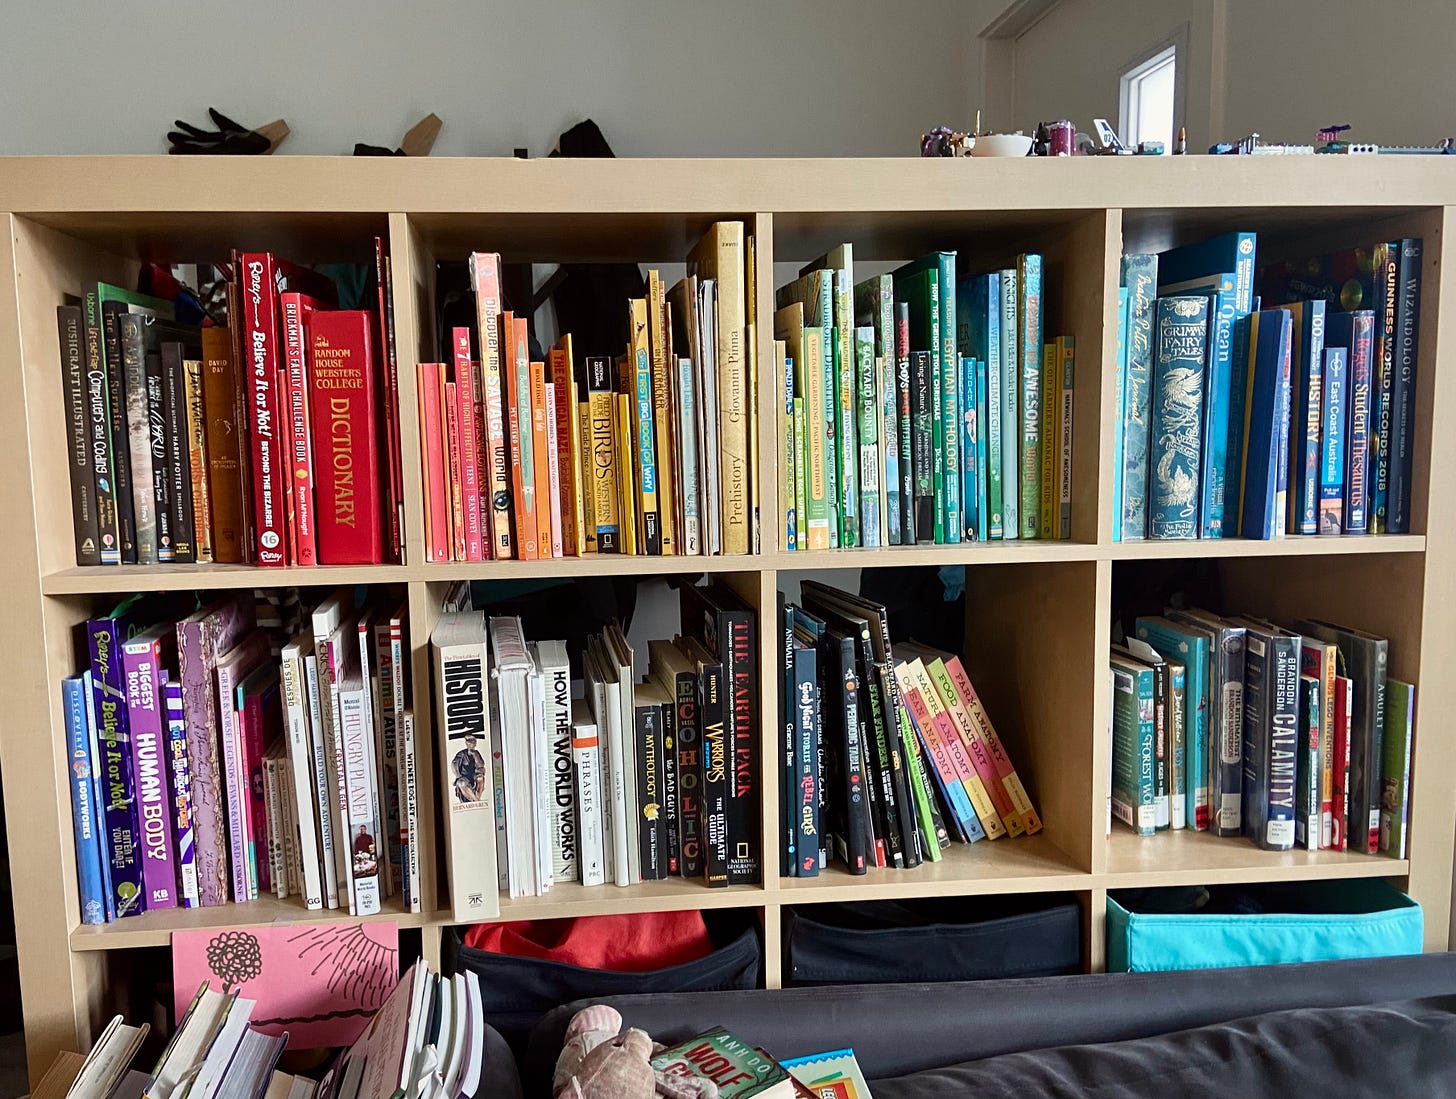 A bookshelf full of colorful books for homeschooling kids to use.